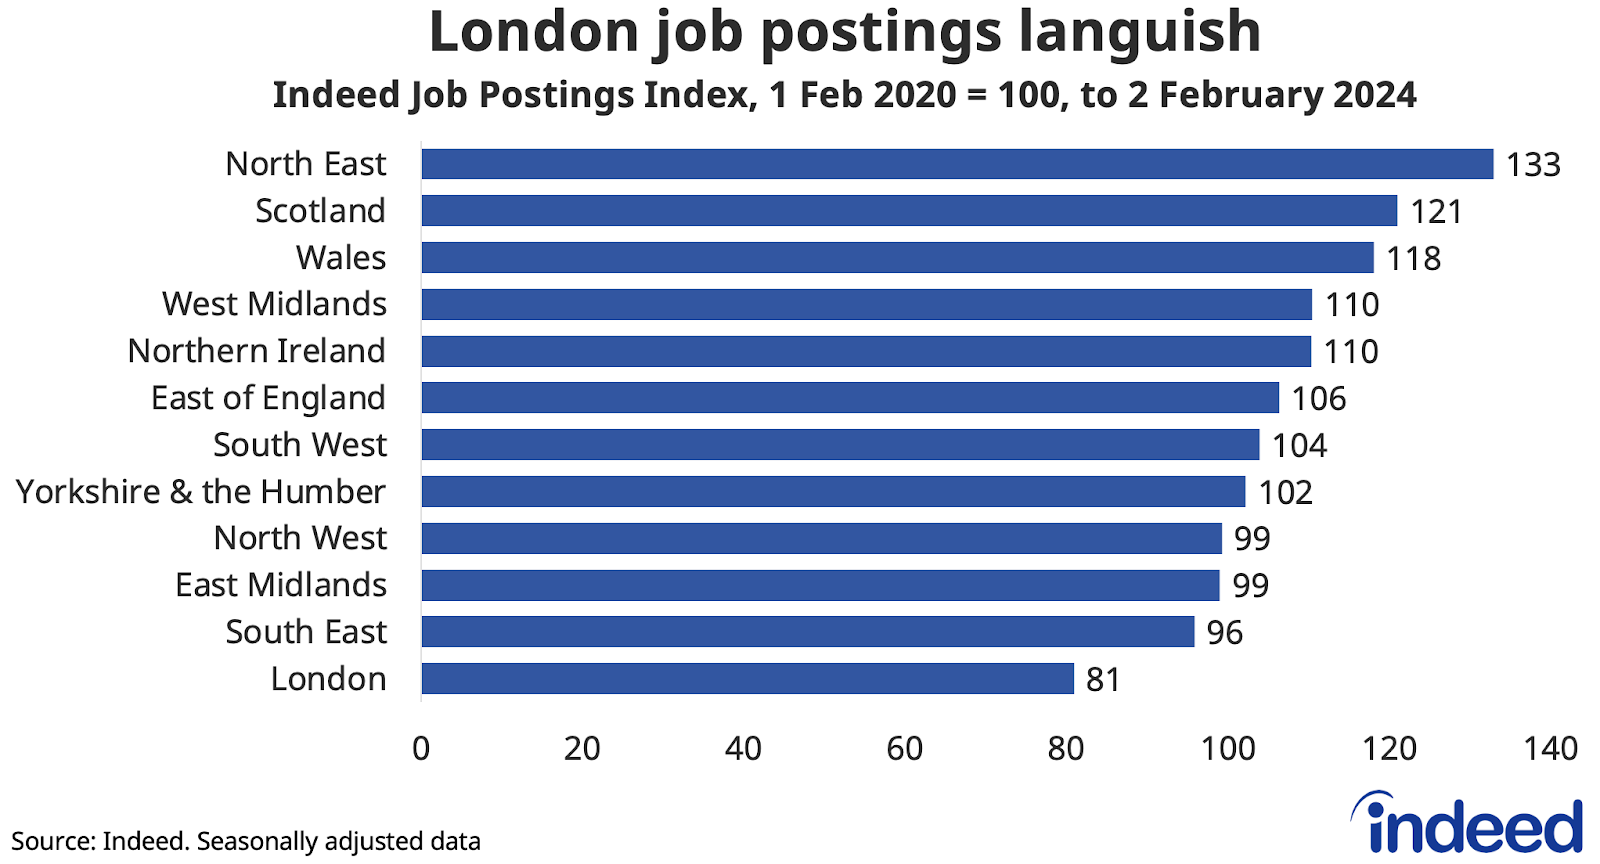 Line chart titled “London job postings languish” shows the regional variation in job postings changes versus pre-pandemic. Postings in London are down 19% on 1 February 2020 levels, whereas those in the North East are 33% above the baseline.   